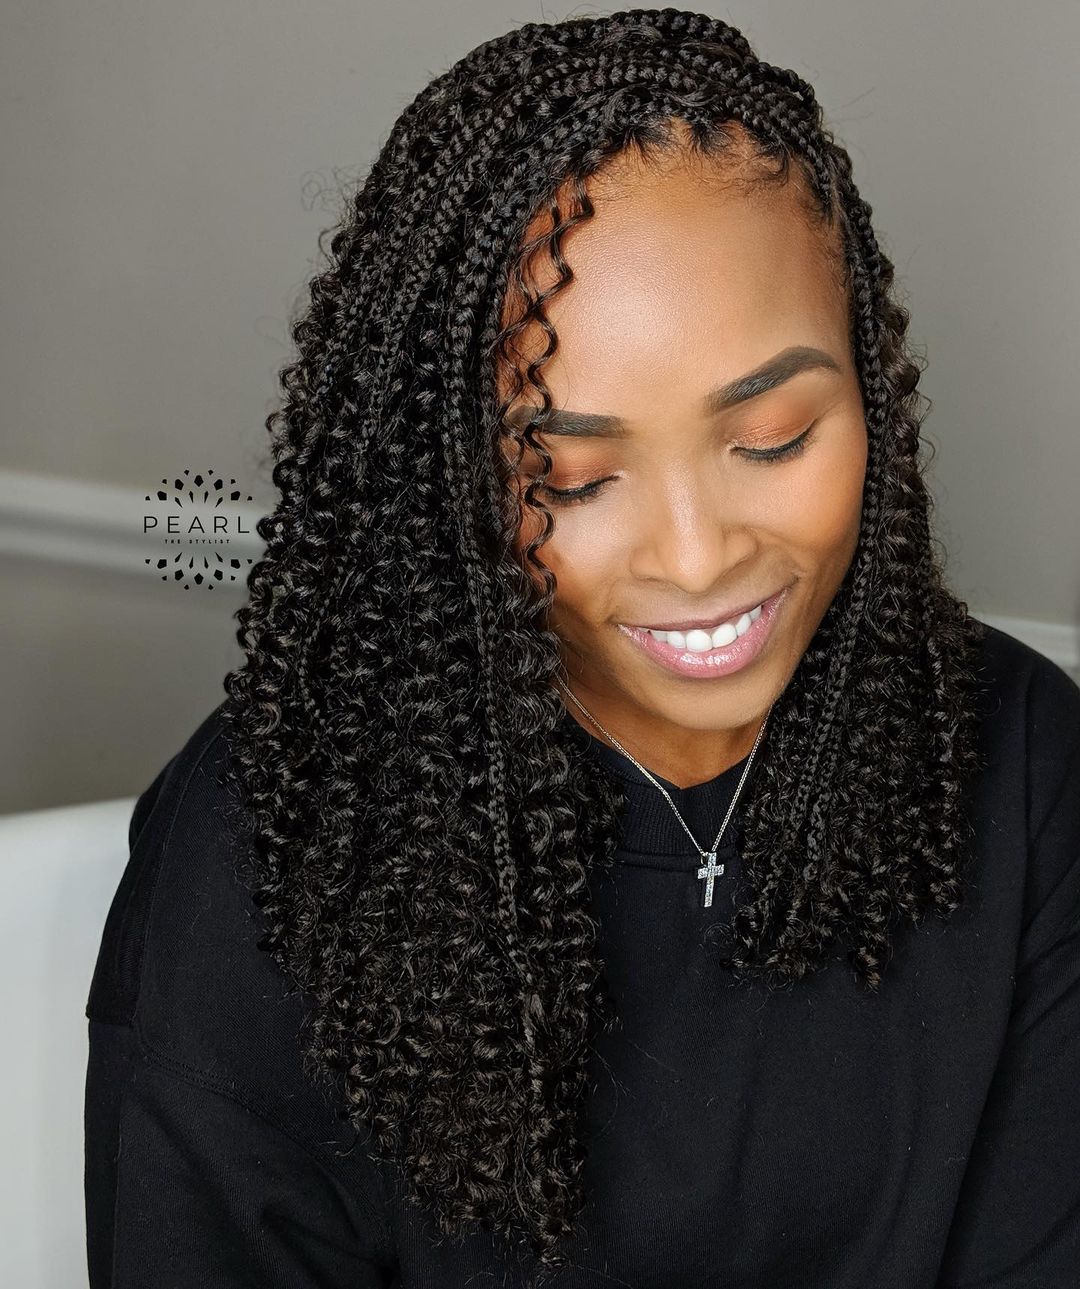 Unique Hairstyles 2021 Female braids: Lovely Braids for Ladies